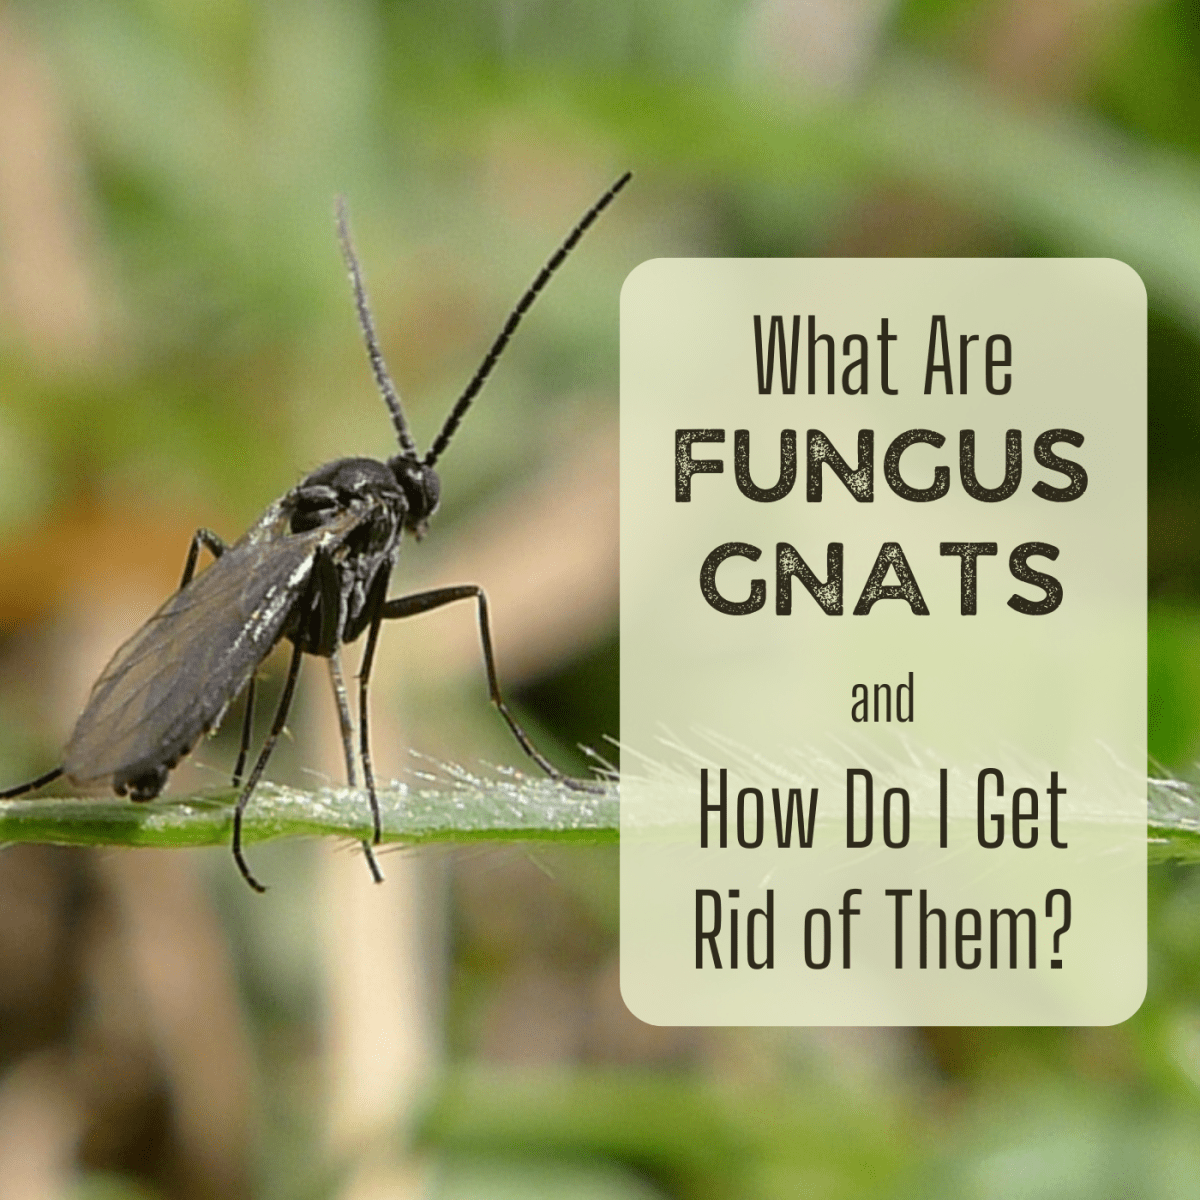 Fungus Gnats Where Do These Little Flying Bugs Come From Dengarden - Little Flying Bugs In Bathroom Sink